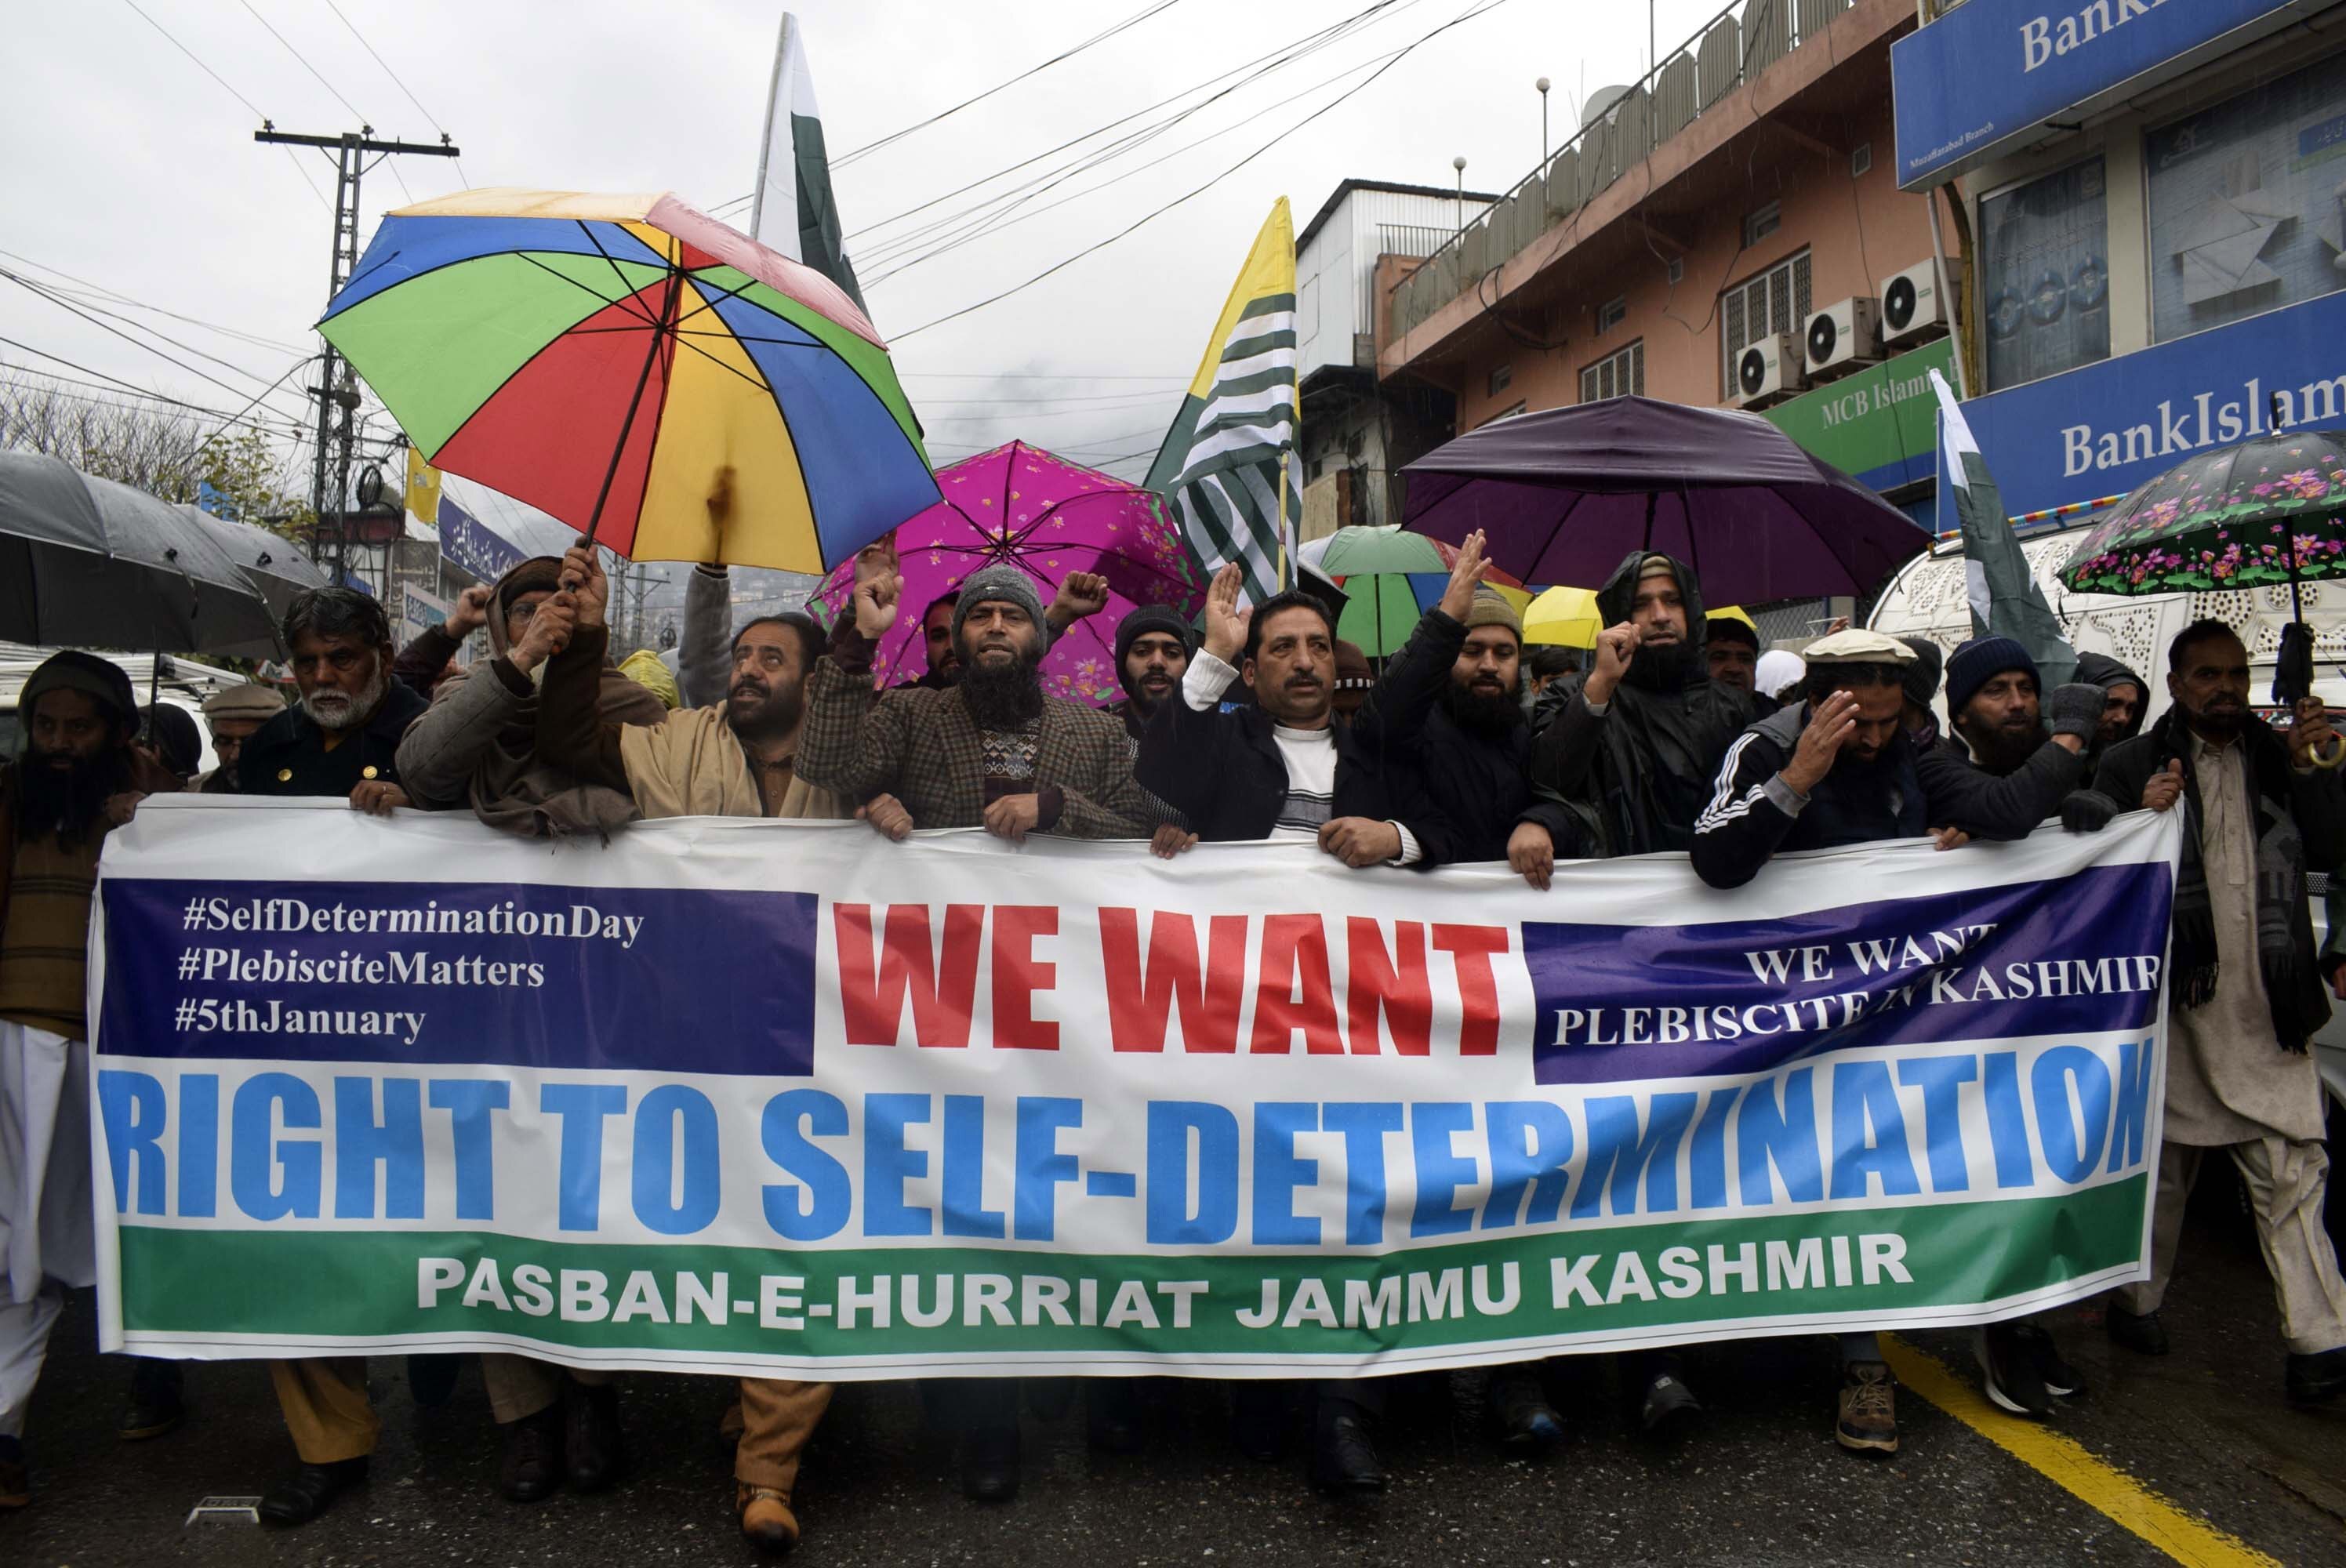 Kashmiris hold placards and shout anti-India slogans during a protest to show solidarity with the people of Indian- administered Kashmir in Muzaffarabad, Pakistani administered Kashmir, this month. The area has been the subject of a sovereignty dispute between Pakistan and India for decades and is a key reason why the two nations have a difficult relationship. Photo: EPA-EFE